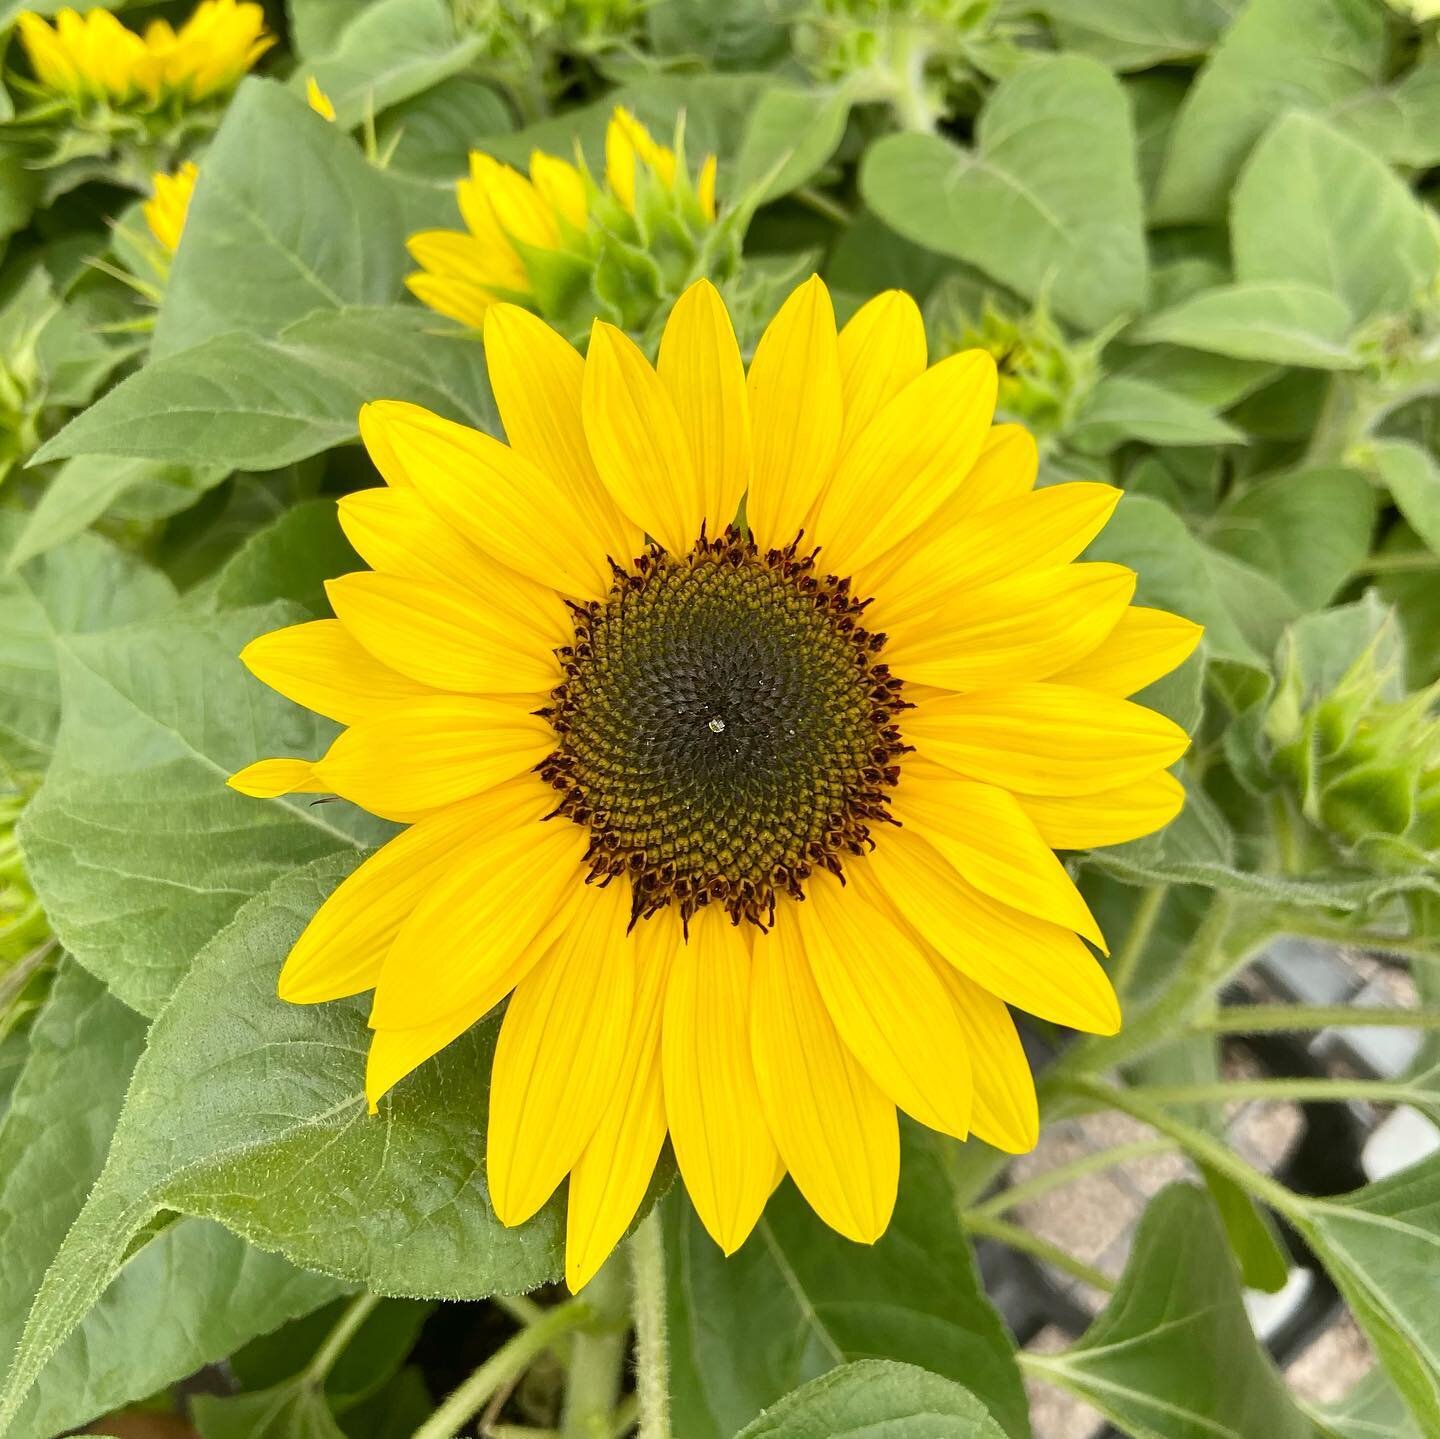 The Suntastic Sunflower 🌻
The name says it all - it&rsquo;s suntastic! 

These dwarf sunflowers work perfectly as a long blooming potted plant, giving you up to 20 flowers each! It will add a burst of colour to any sunny garden bed. 
They&rsquo;re a